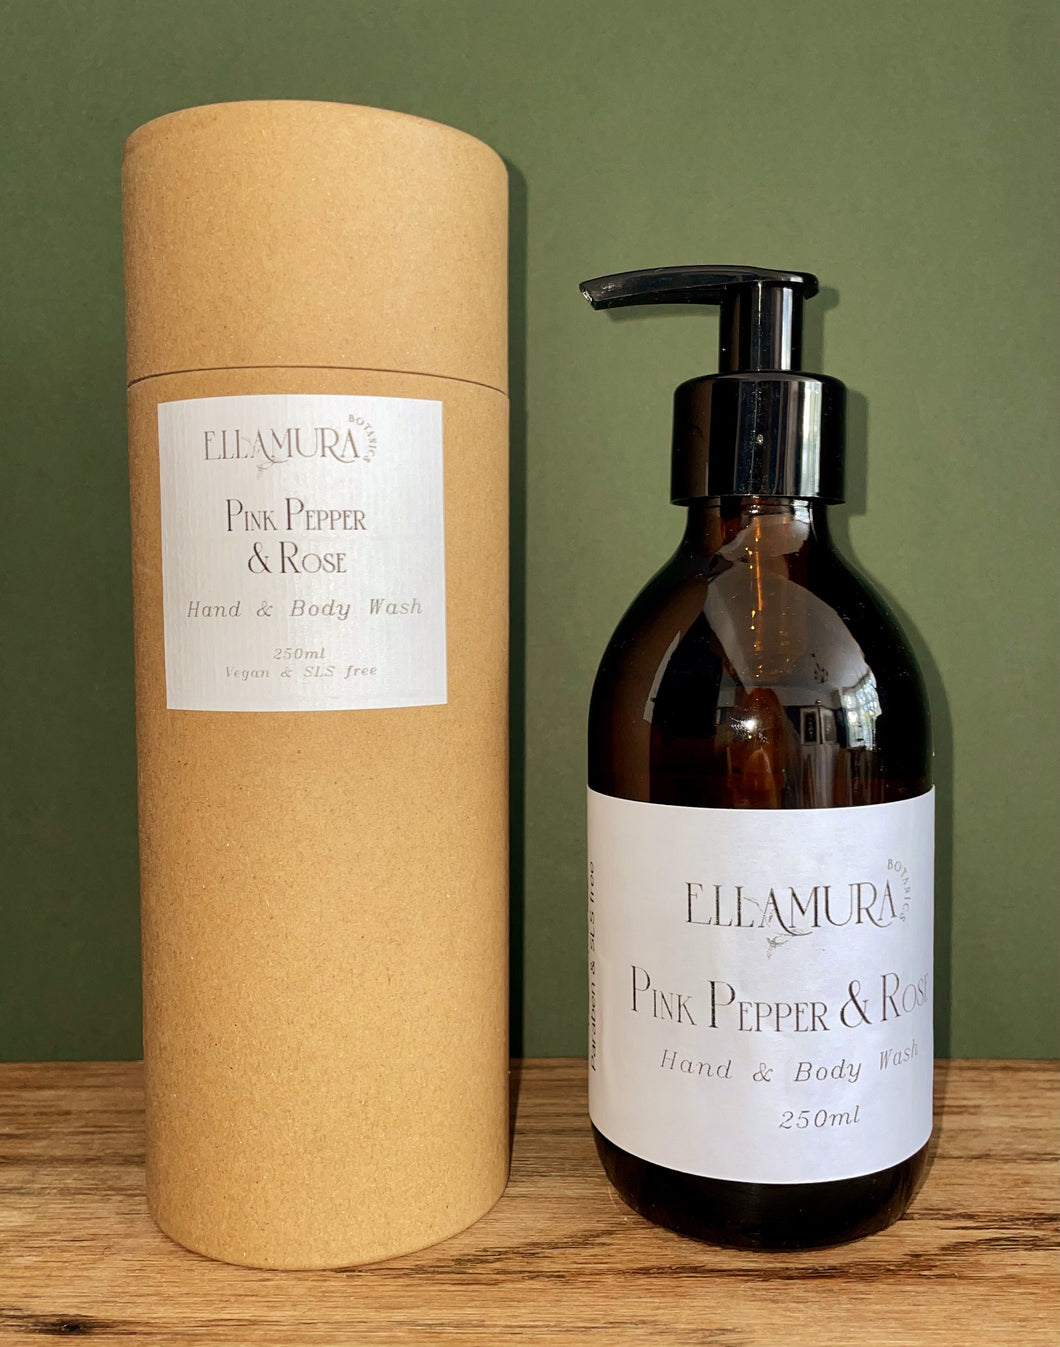 Pink Pepper & Rose Hand & Body Wash